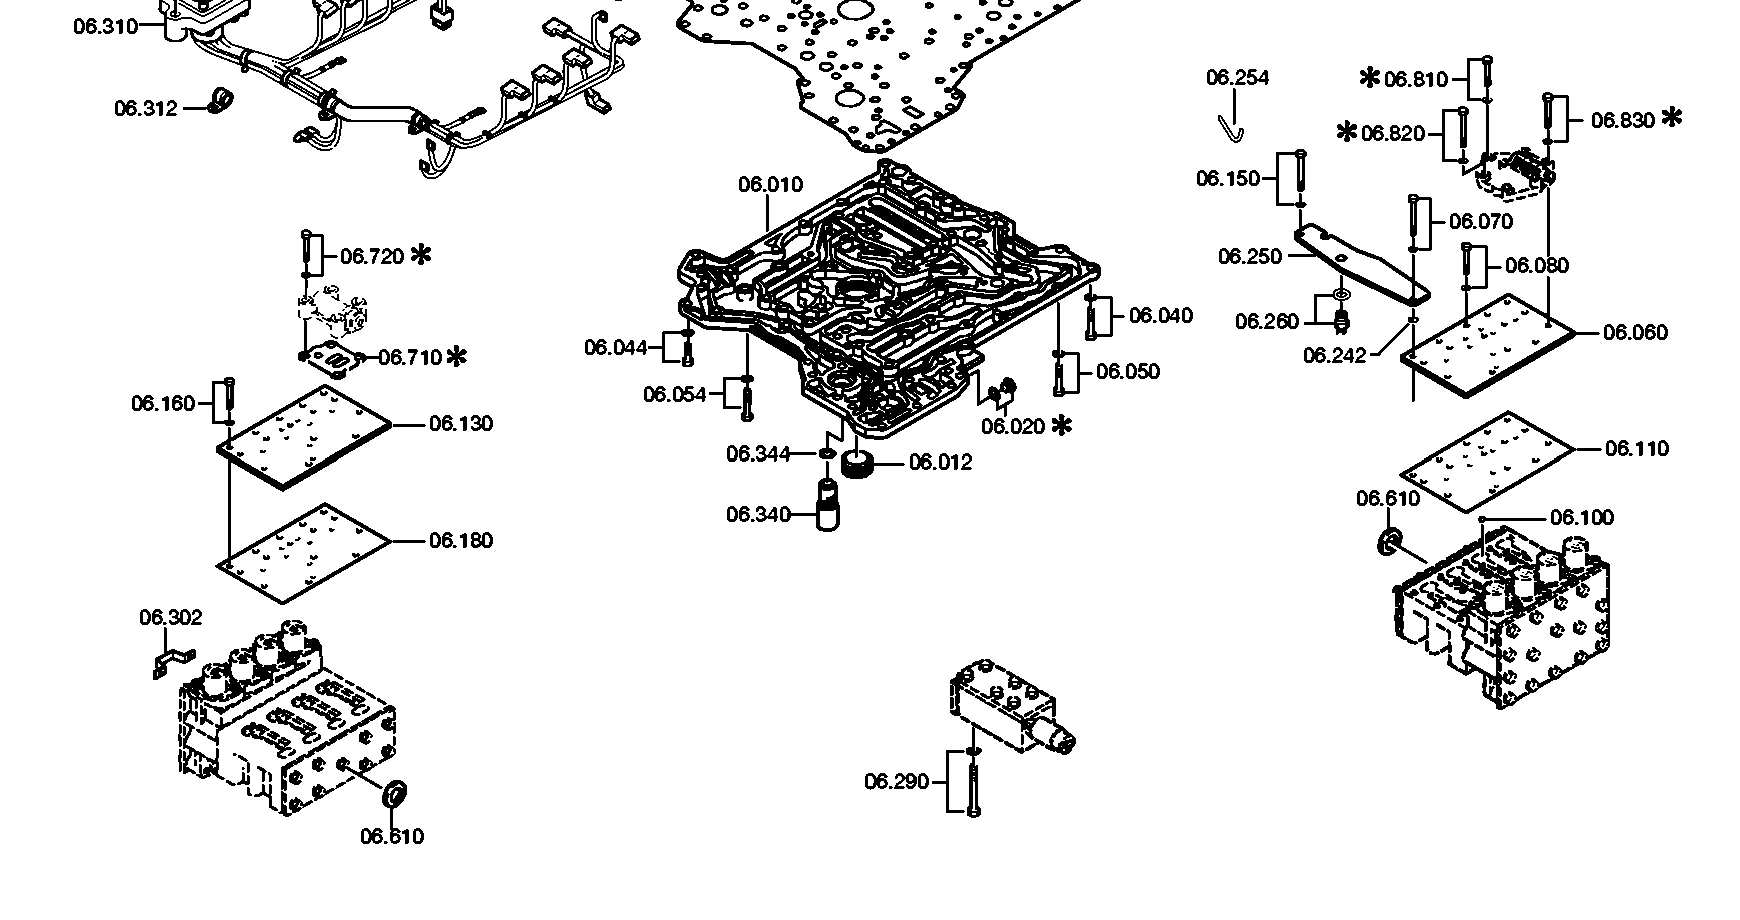 drawing for DAF 1291499 - WIRING HARNESS (figure 1)